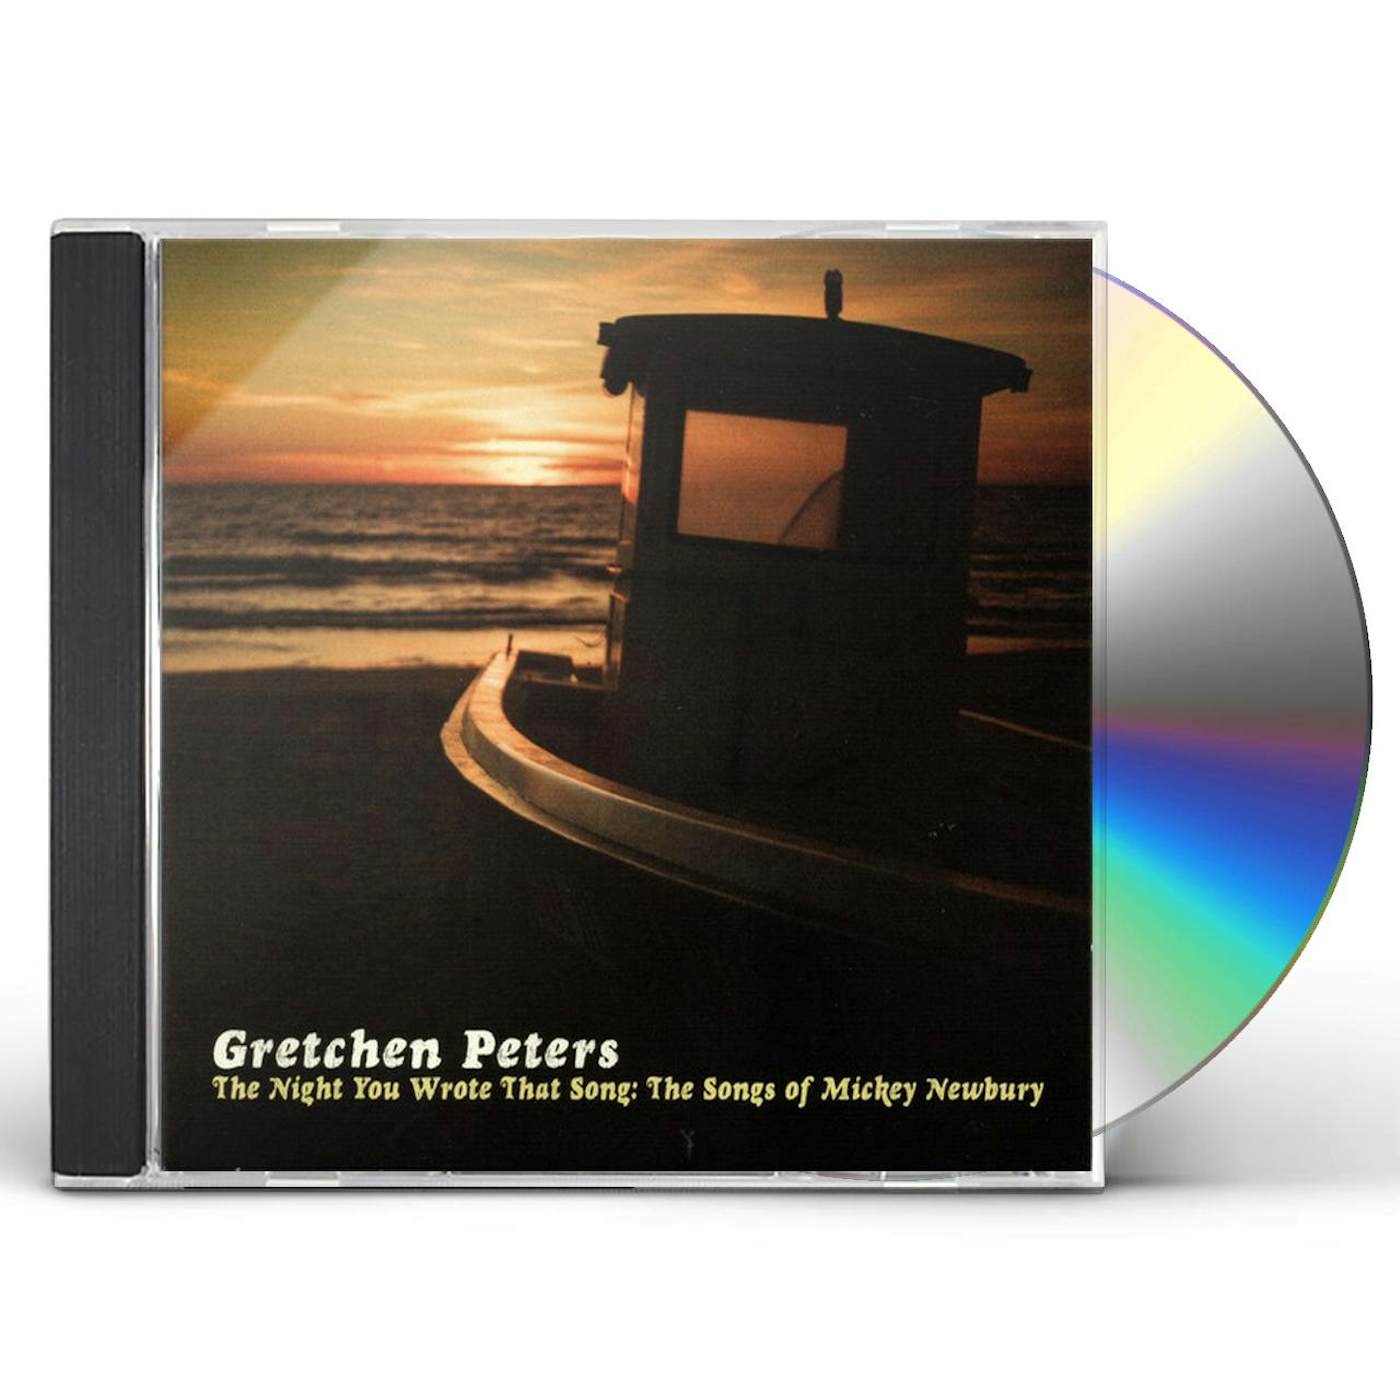 Gretchen Peters NIGHT YOU WROTE THAT SONG: SONGS OF MICKEY NEWBURY CD